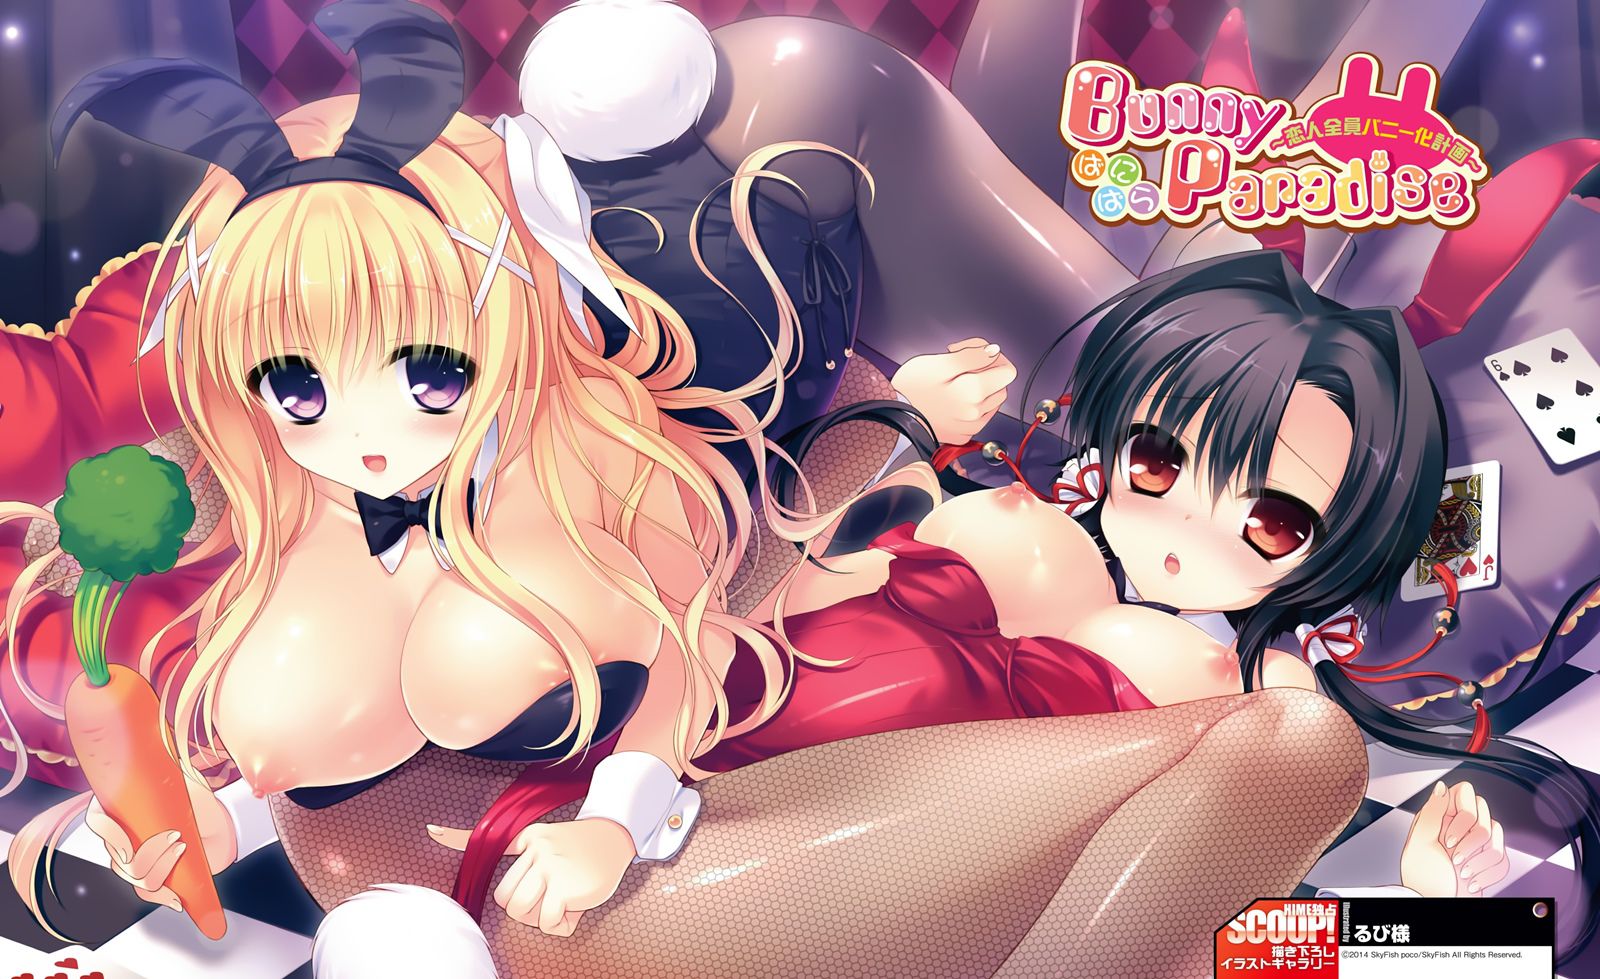 Bunny Paradise carried on from [under age 18 prohibited eroge HCG] erotic pictures part 1 2